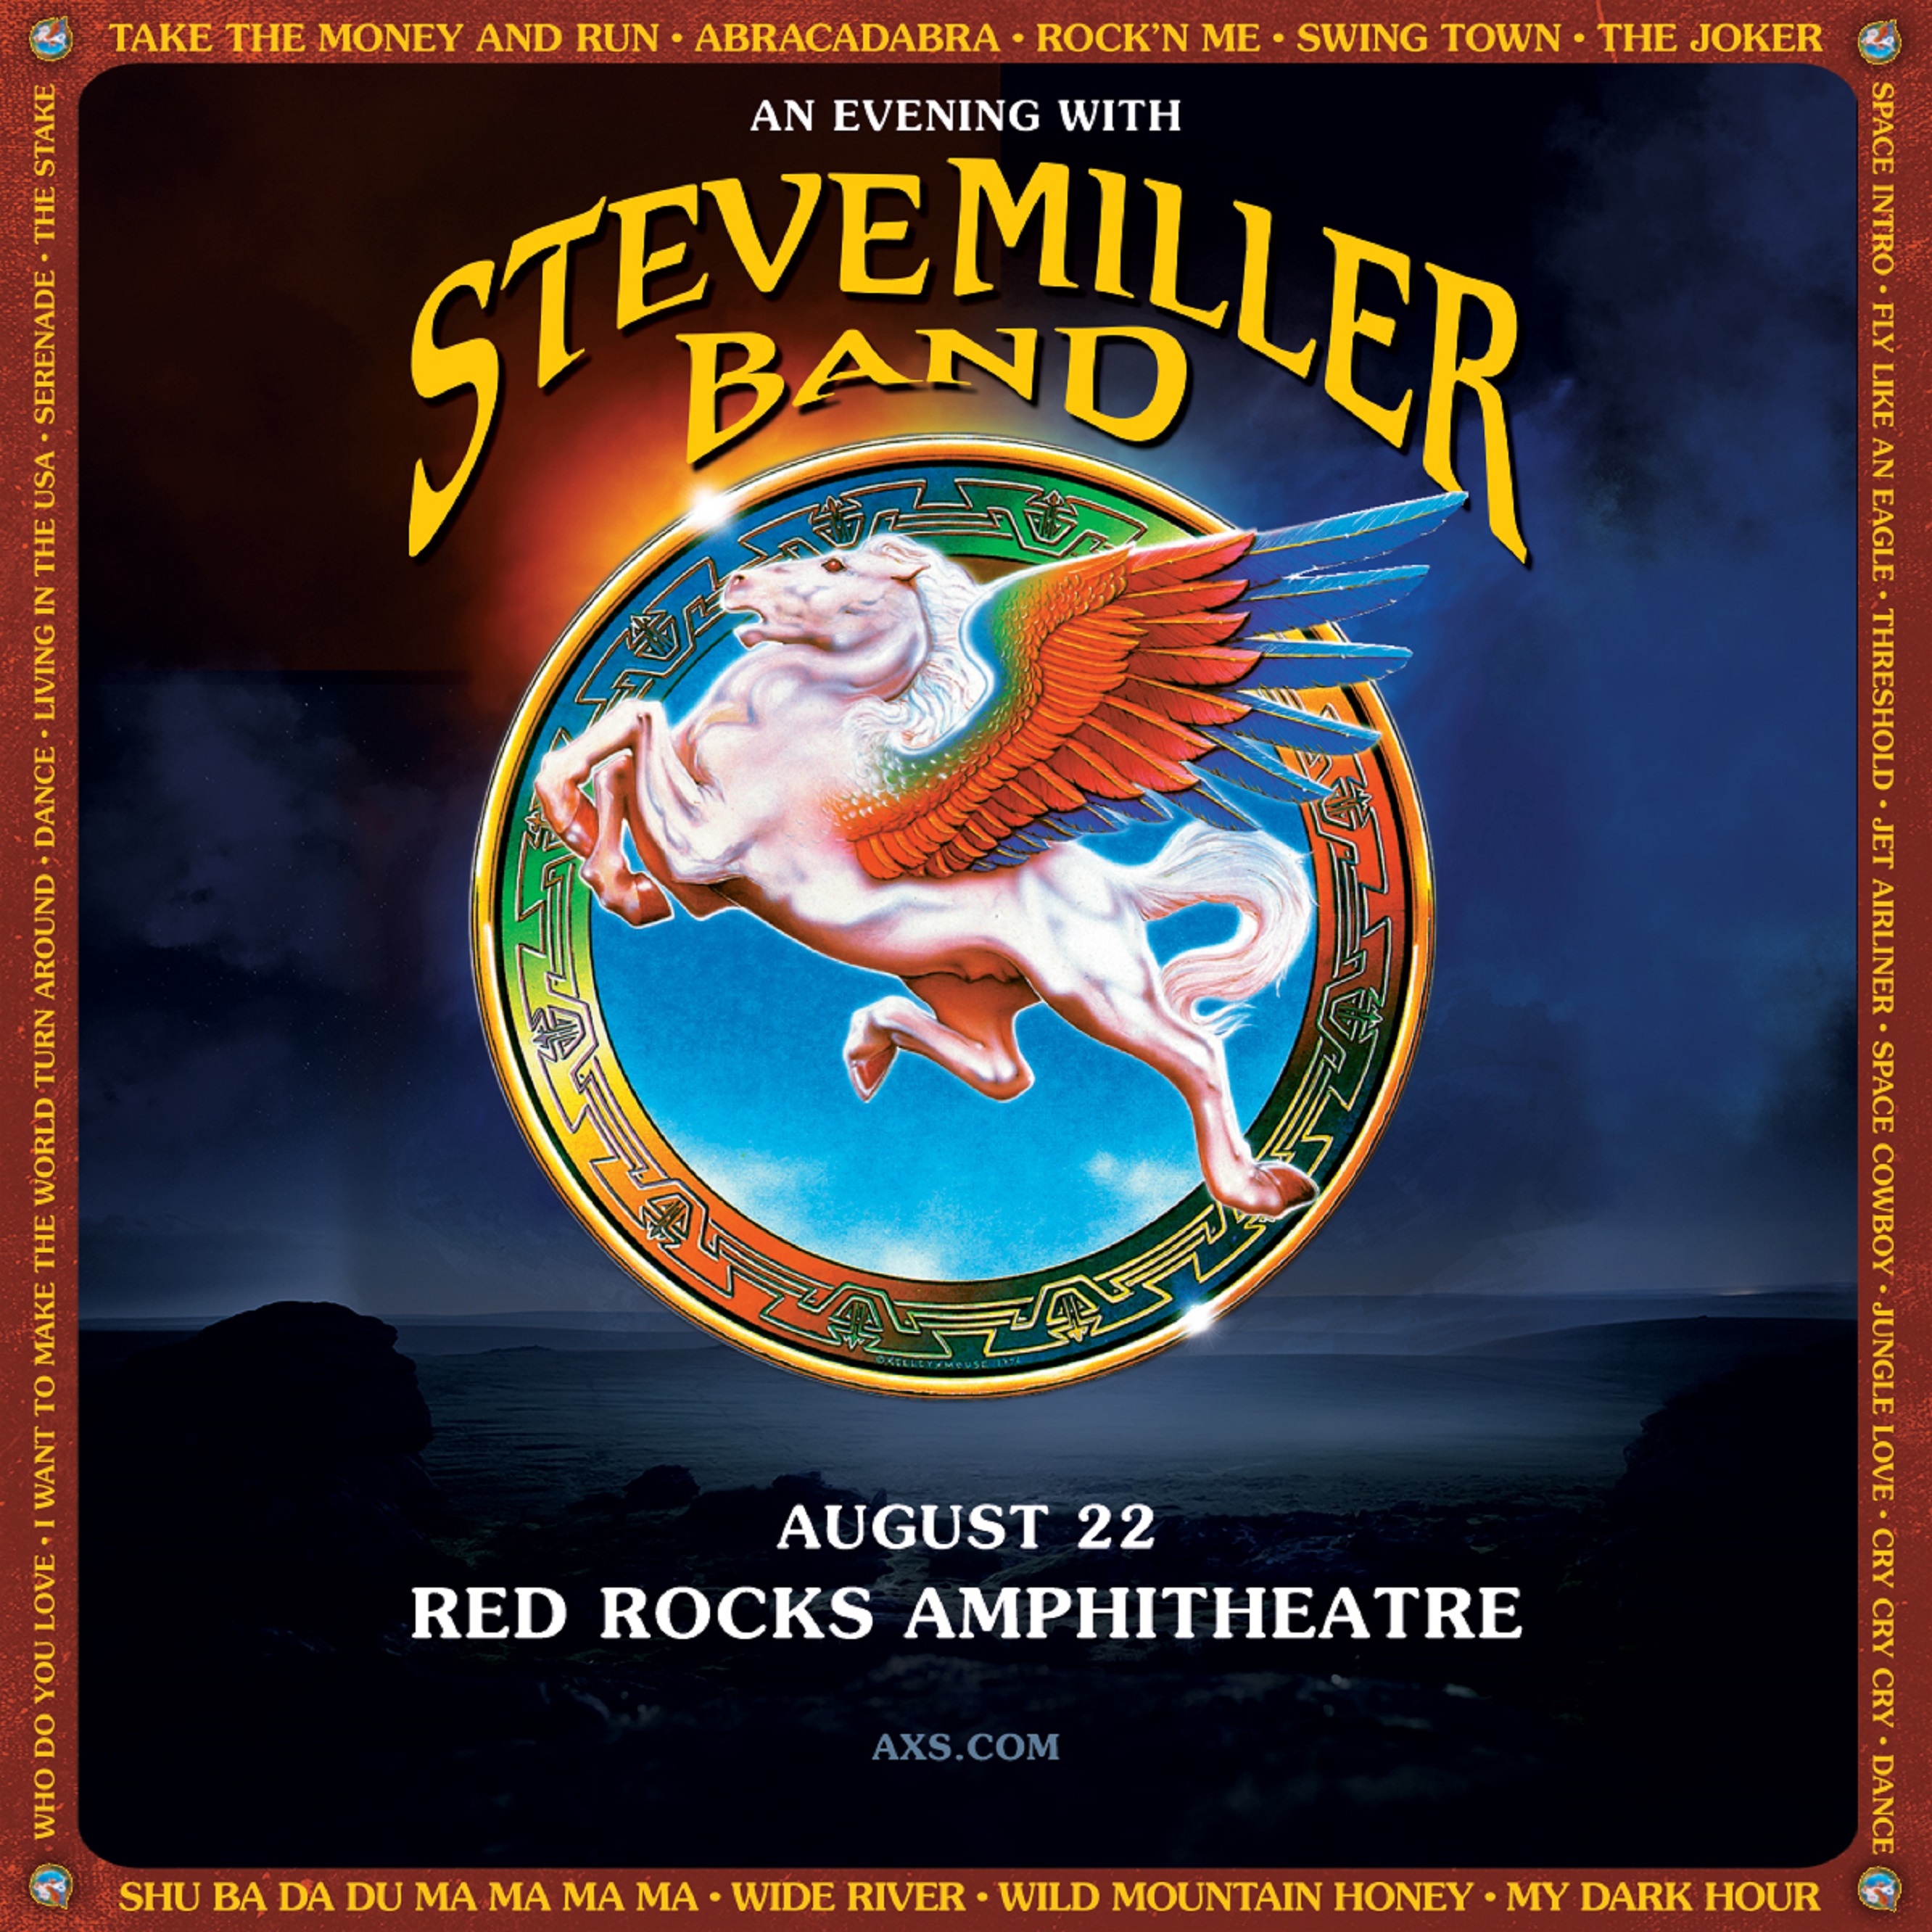 Steve Miller Band to play Red Rocks Amphitheatre August 22nd, 2022